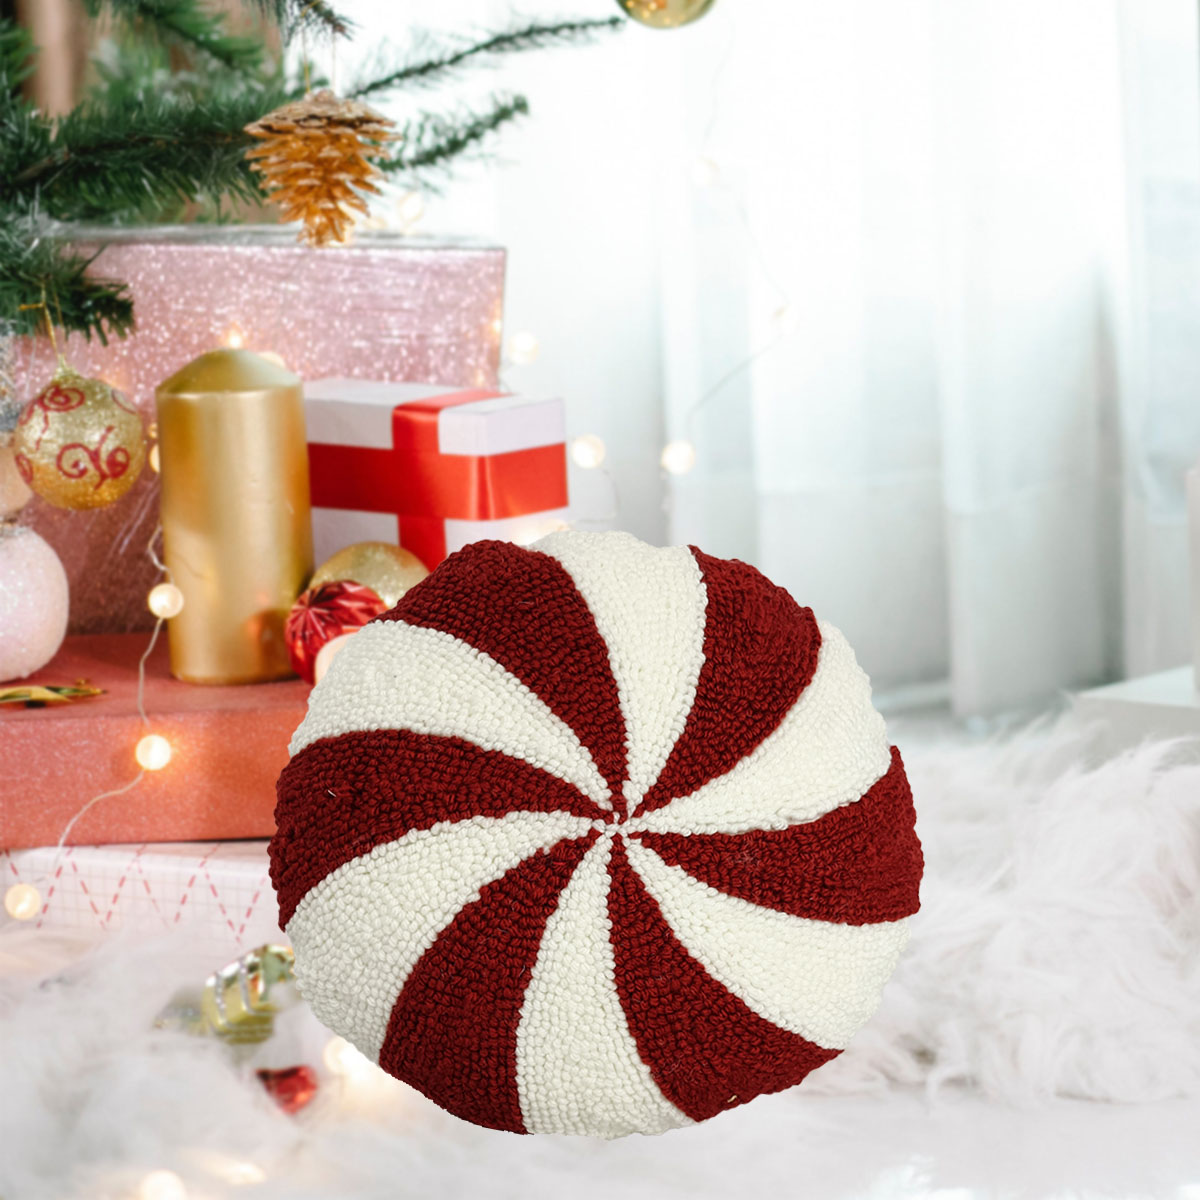 Red and White Stripes Xmas Pillow: Festive Holiday Decor